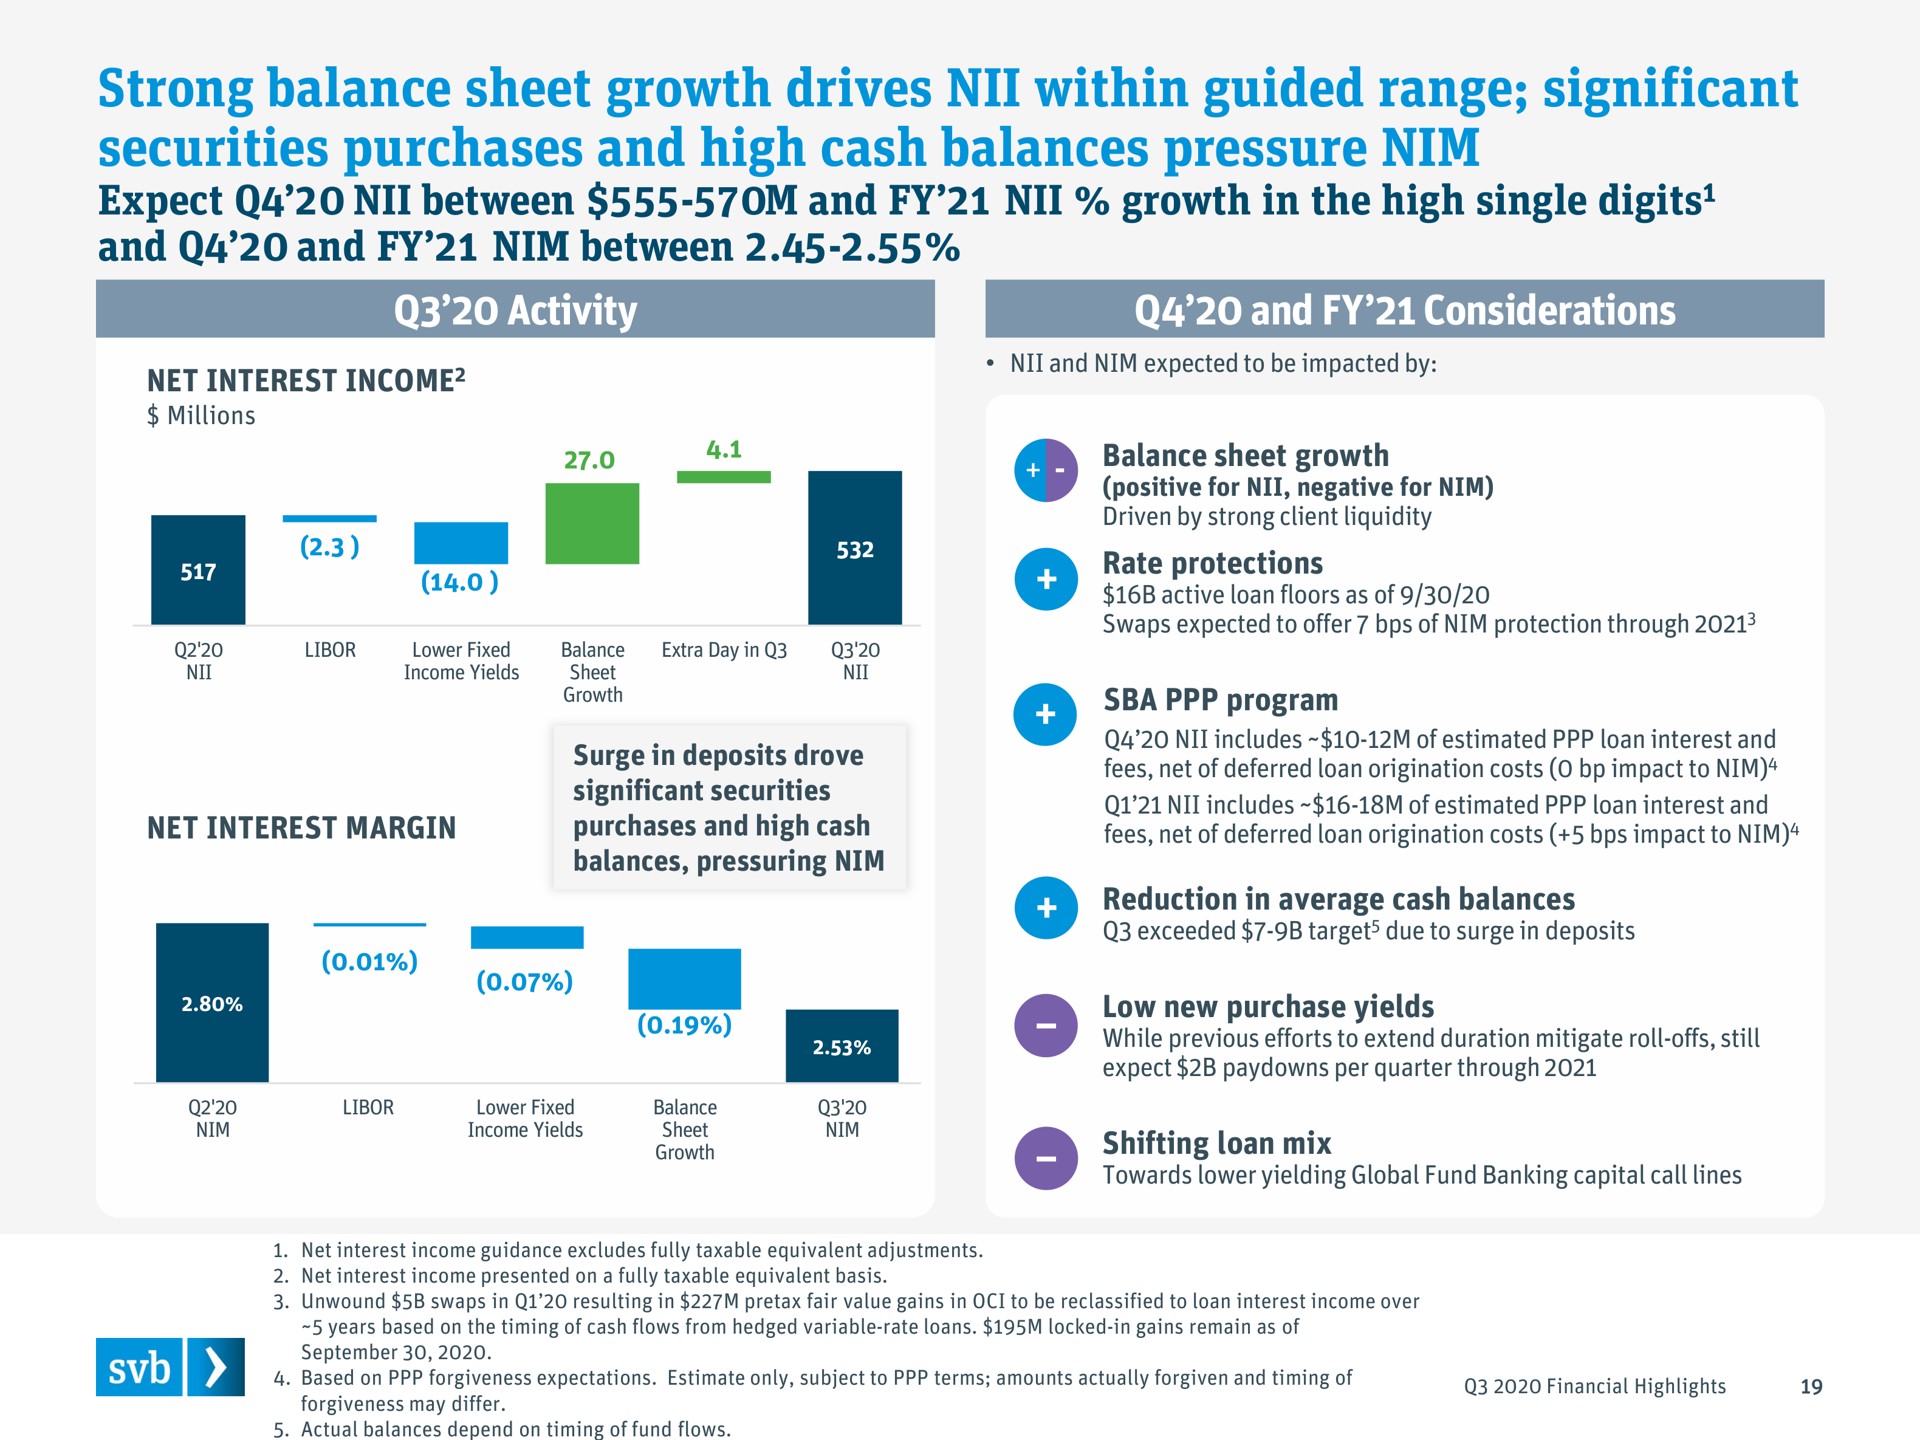 strong balance sheet growth drives within guided range significant securities purchases and high cash balances pressure nim | Silicon Valley Bank